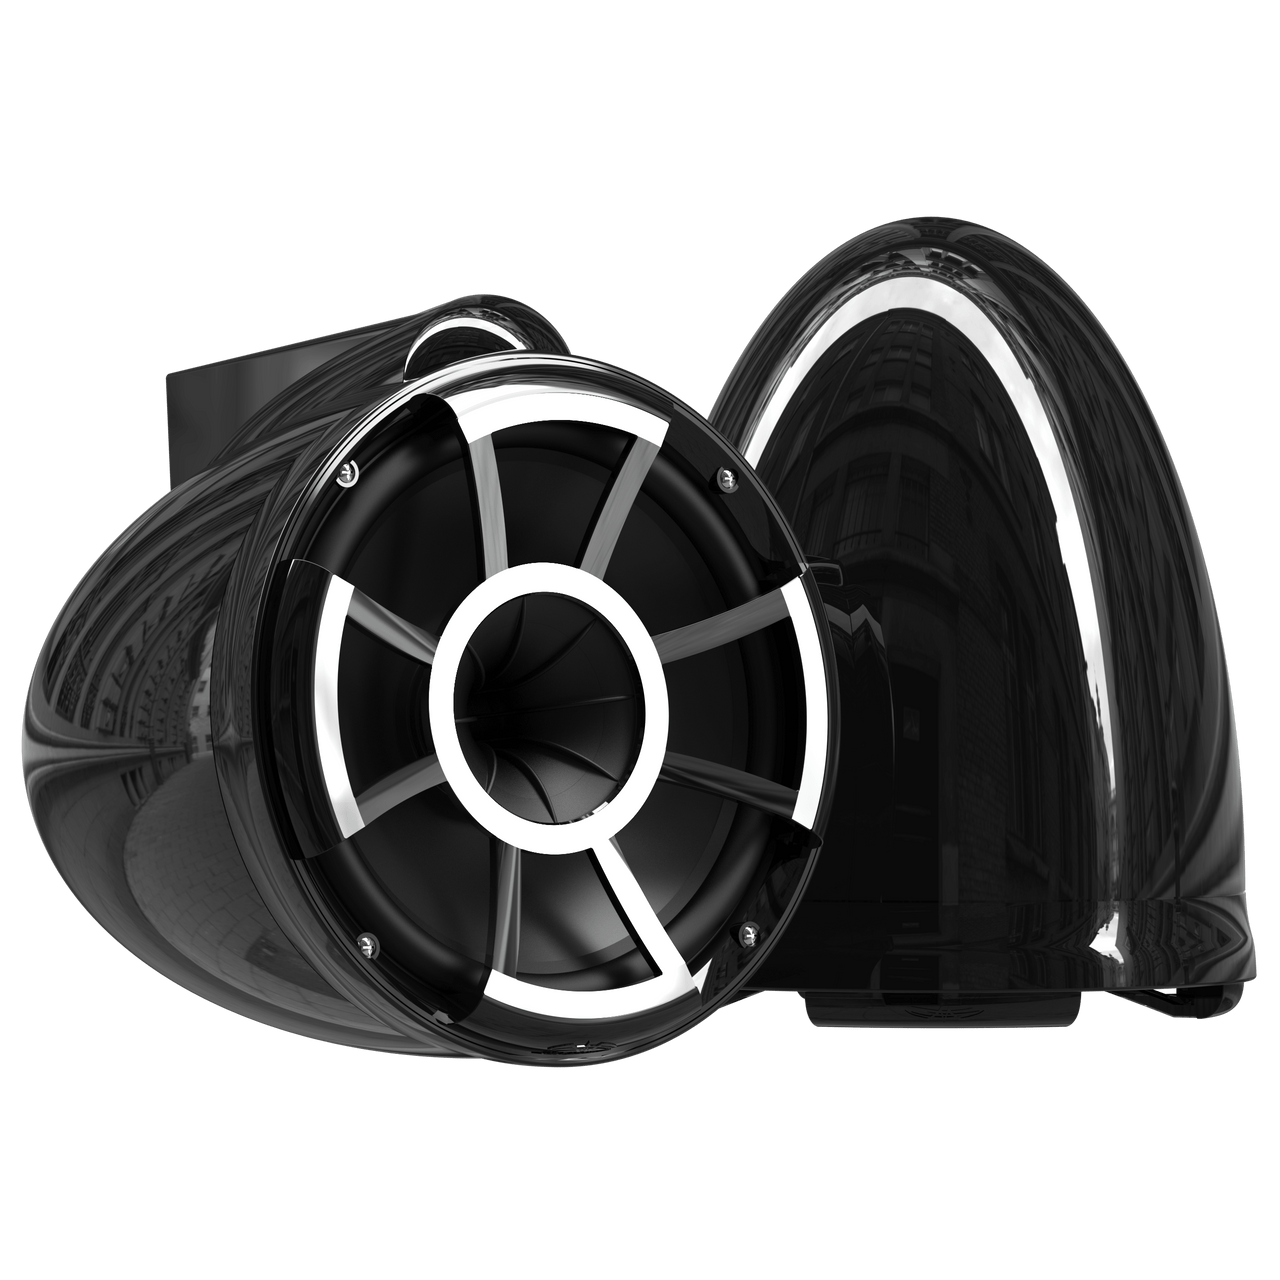 WET SOUNDS Coaxial REV 10 Black With X Mount